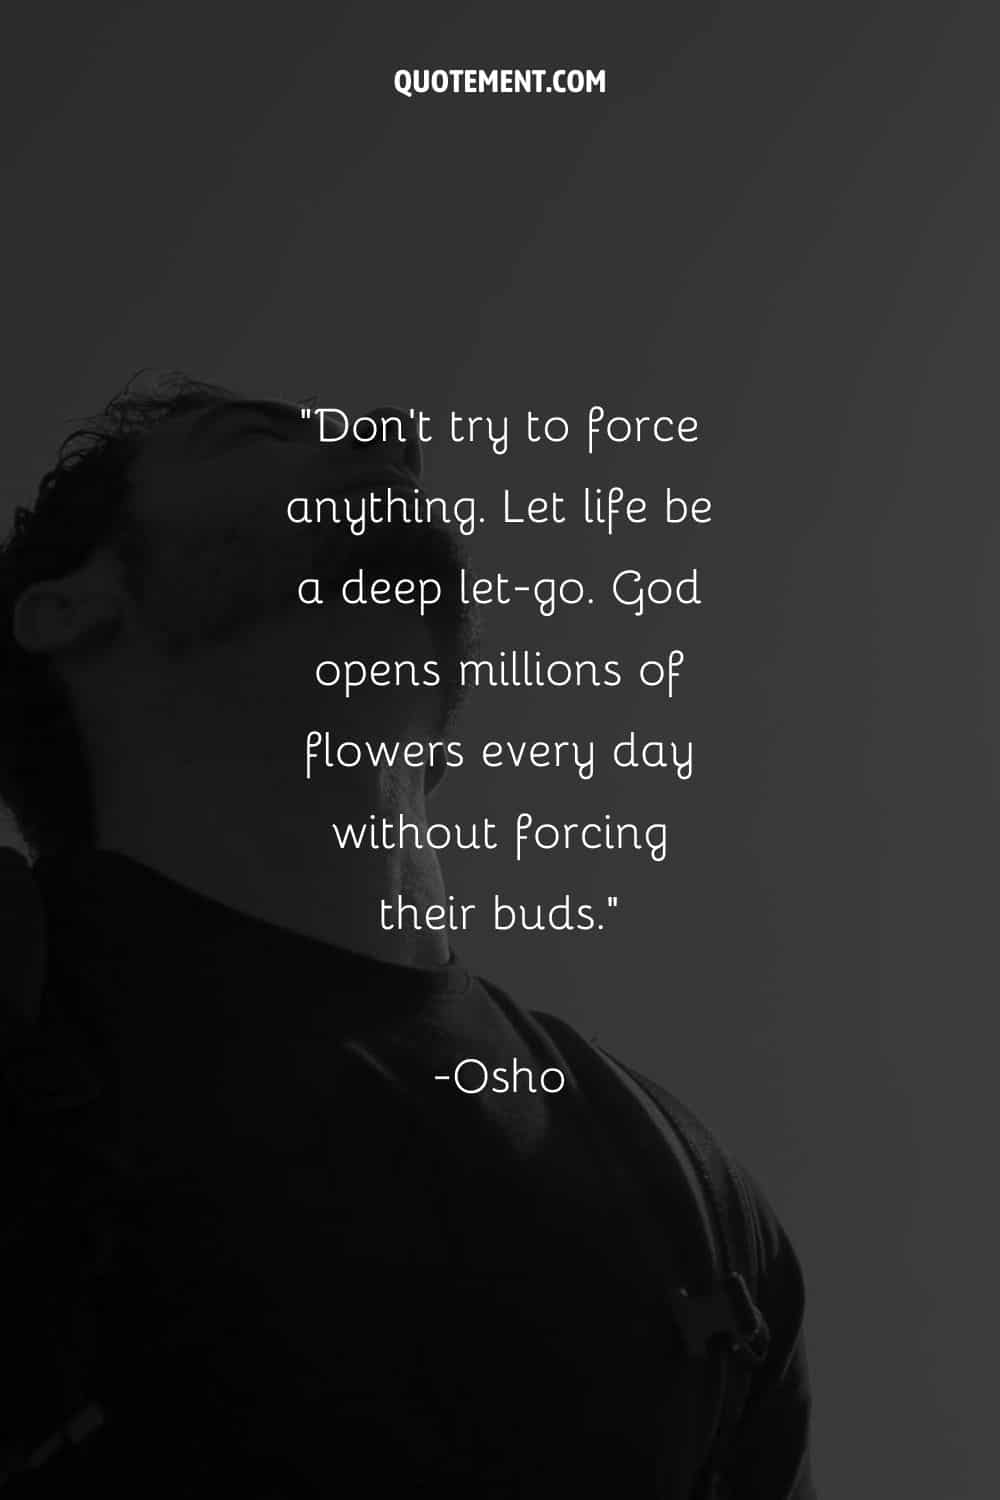 Image of a man with closed eyes representing a quote by Osho.